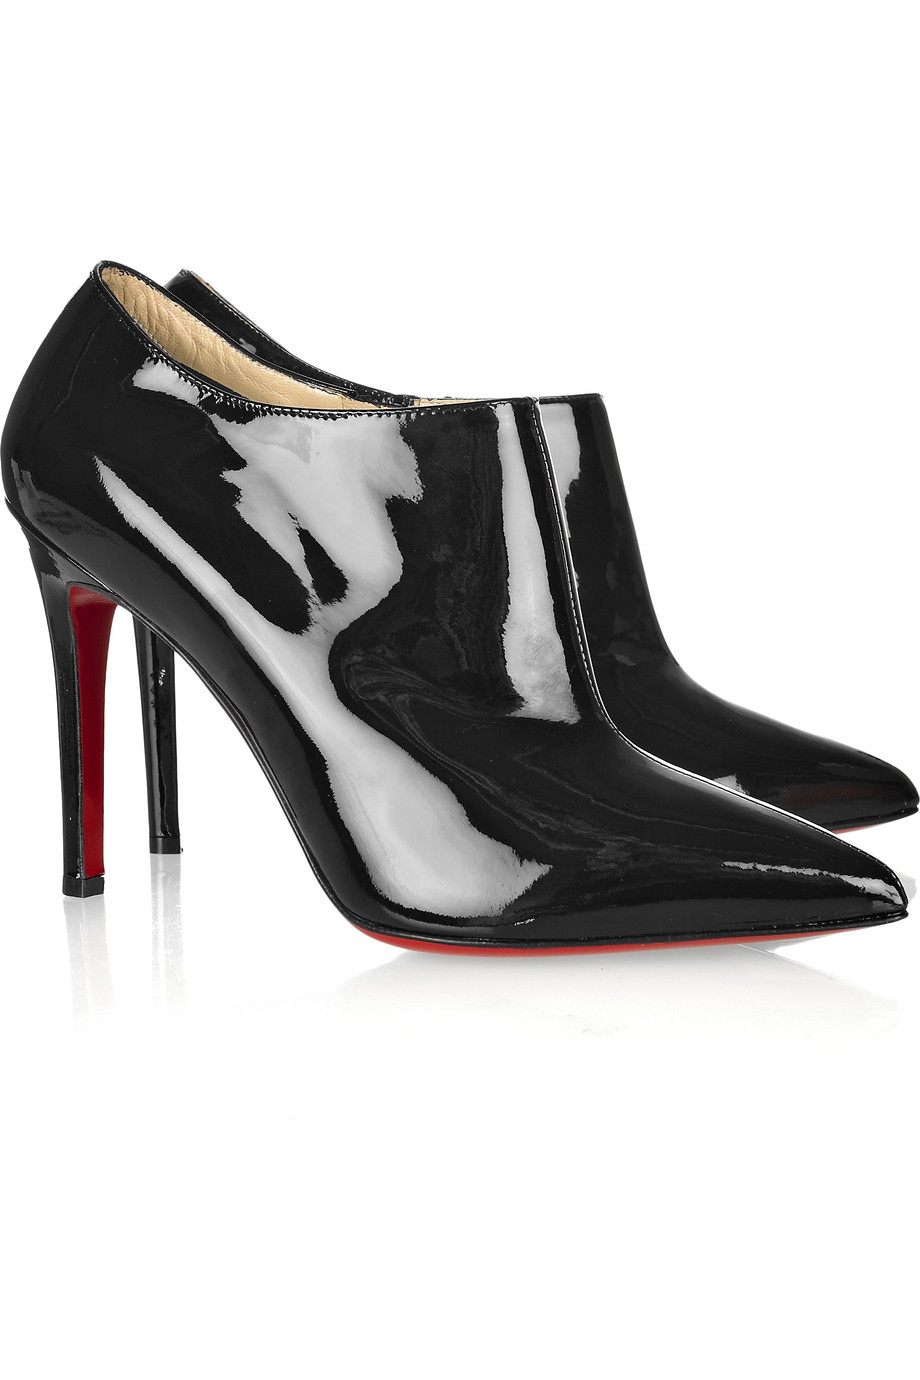 Christian louboutin Dahlia 100 Patent Leather Ankle Boots in Black ...  